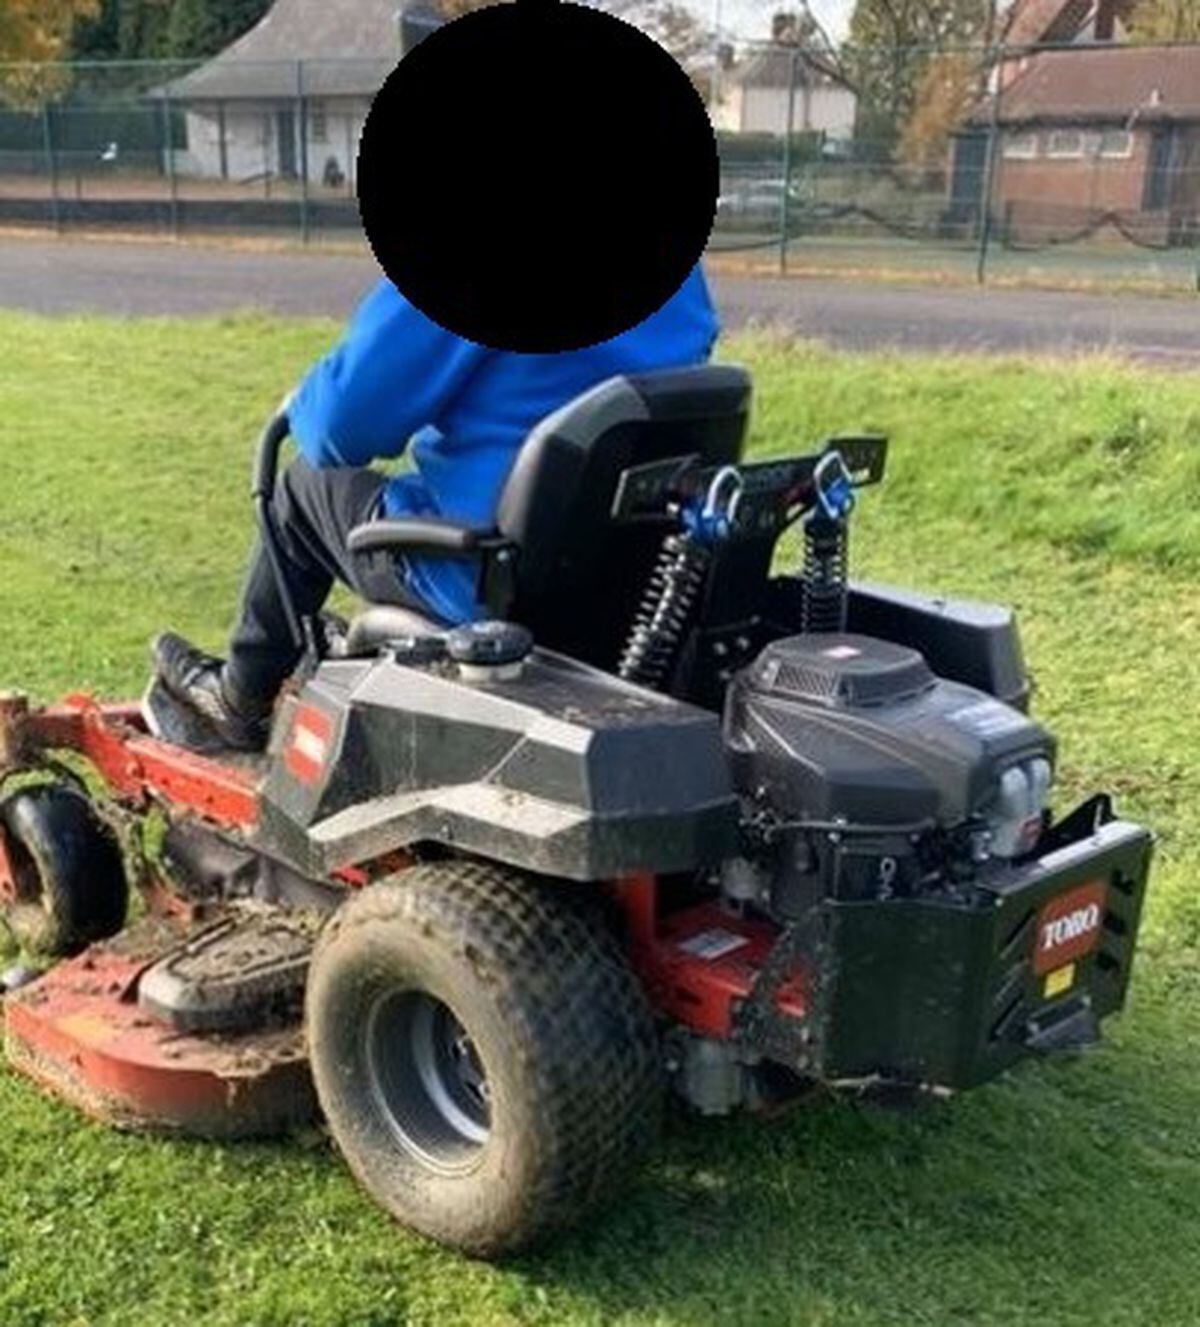 The ride-on mower is part of £12,000 worth of items stolen